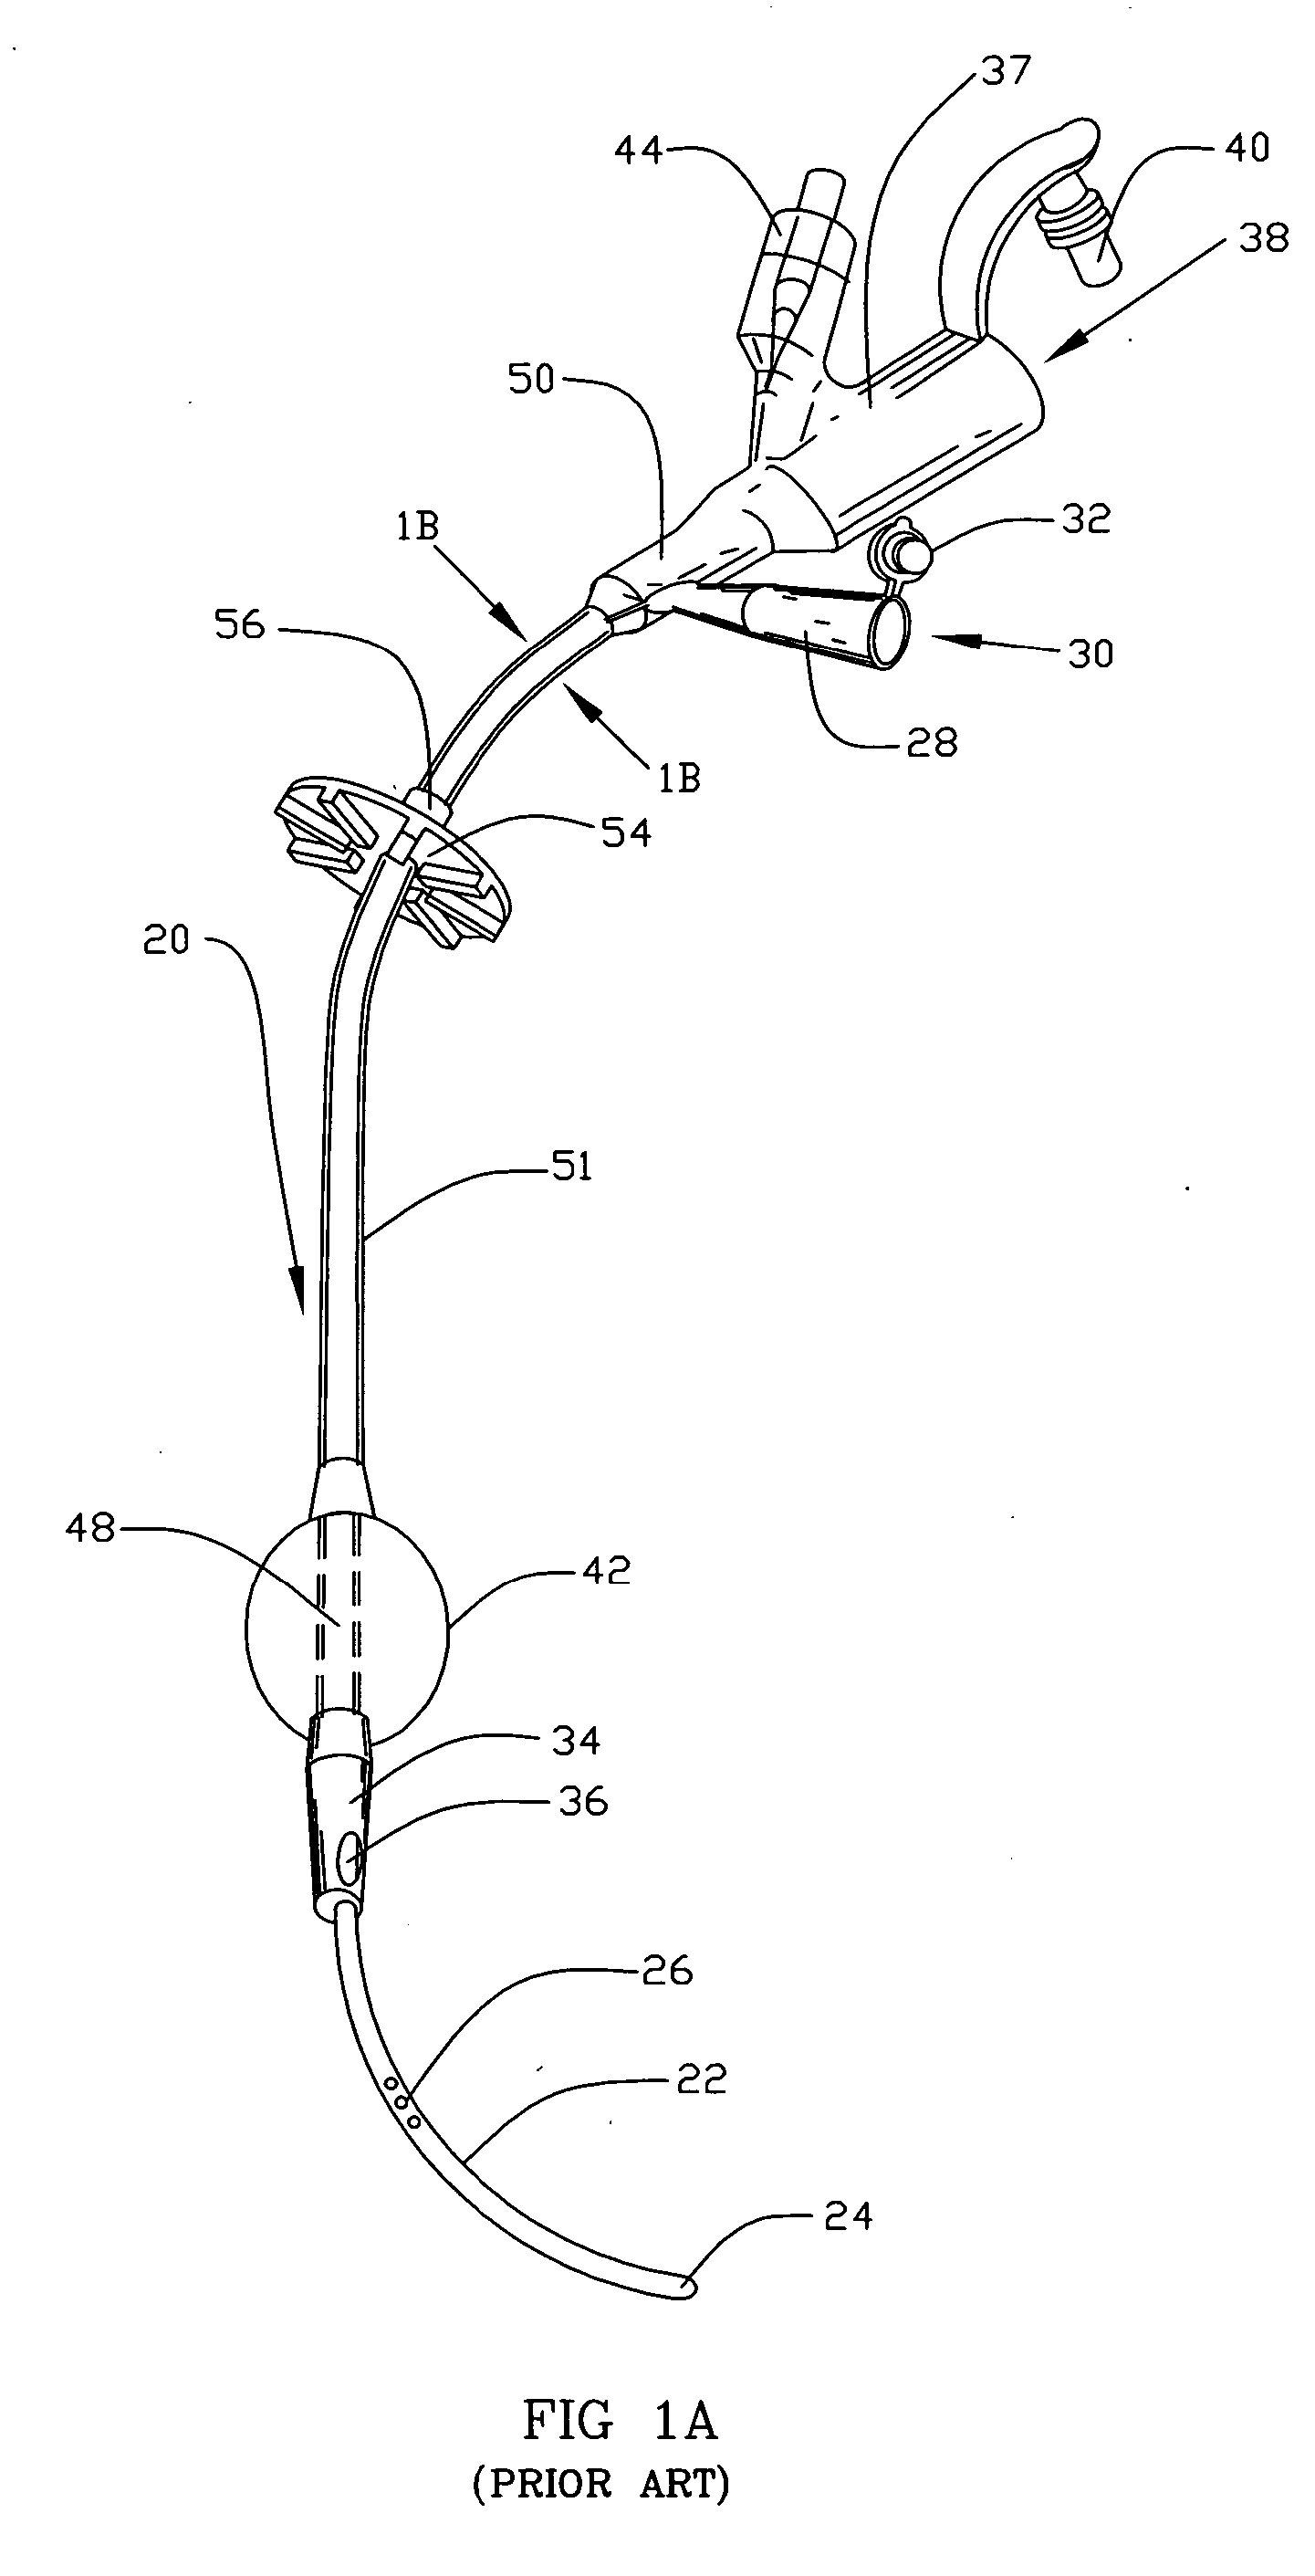 Connector with connection mechanism adapted for releasable interconnection with tube